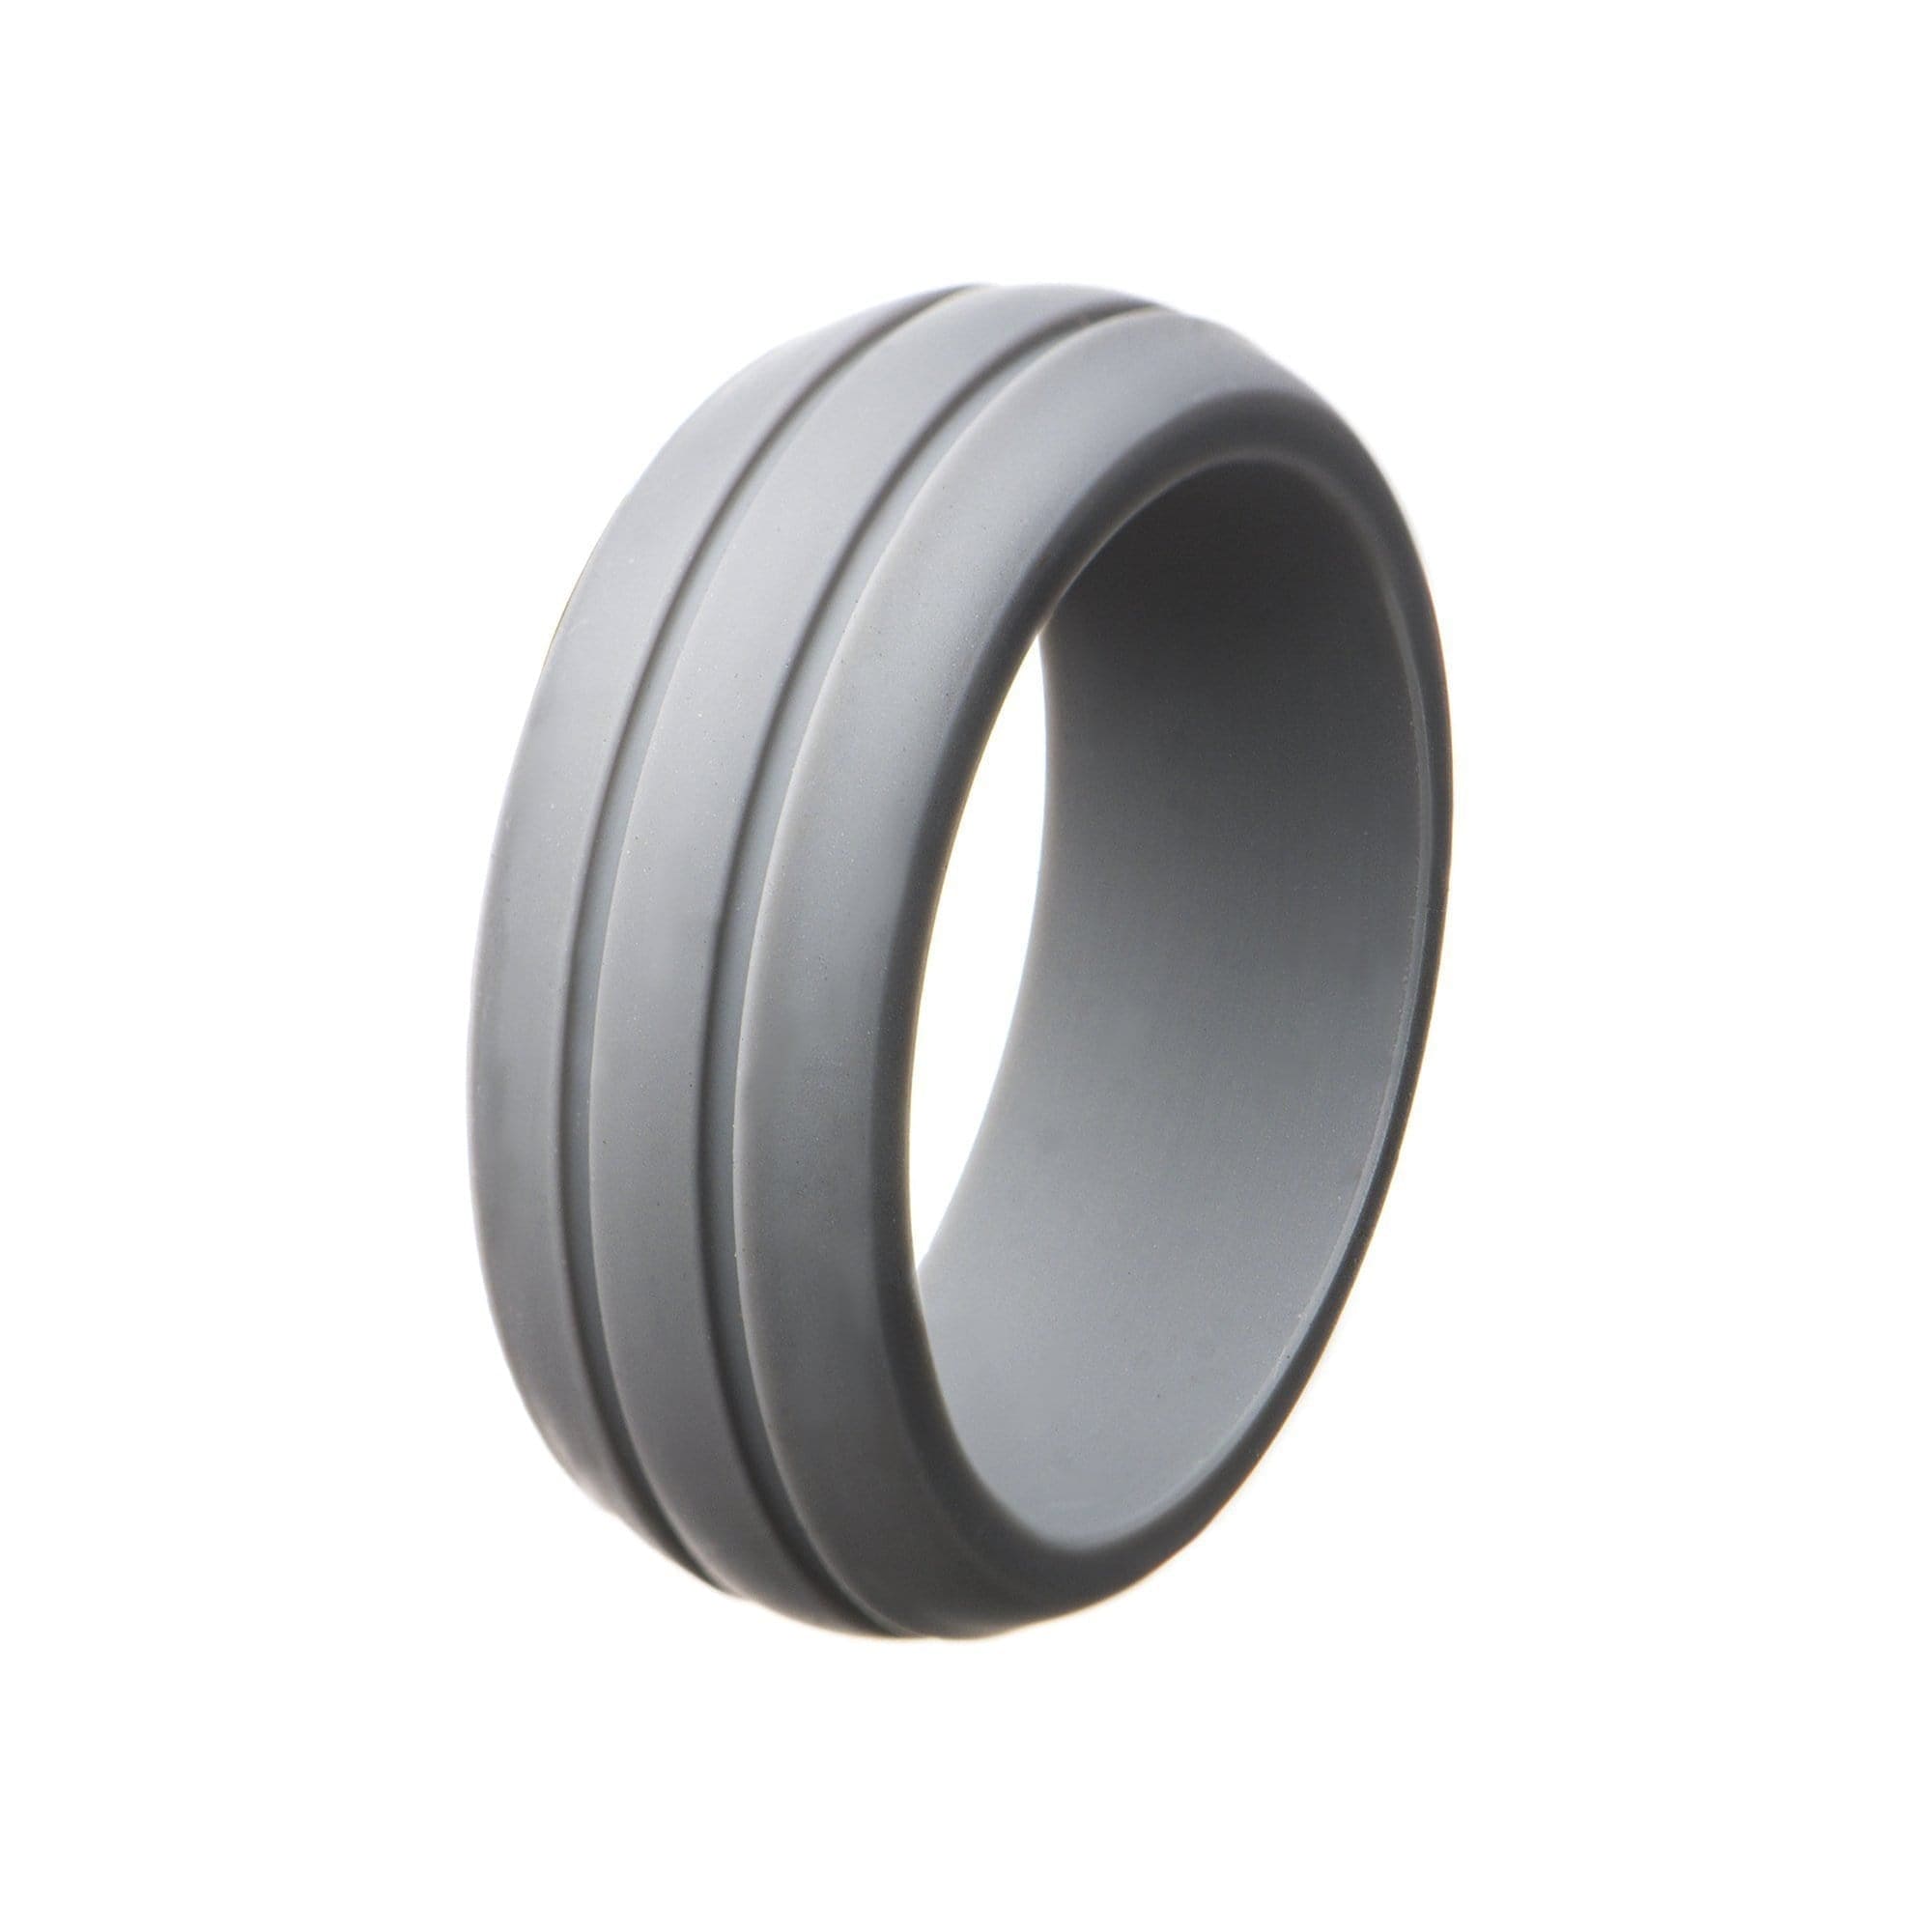 INOX JEWELRY Rings Gray Silicone 9mm Double Lined Safety Band Ring